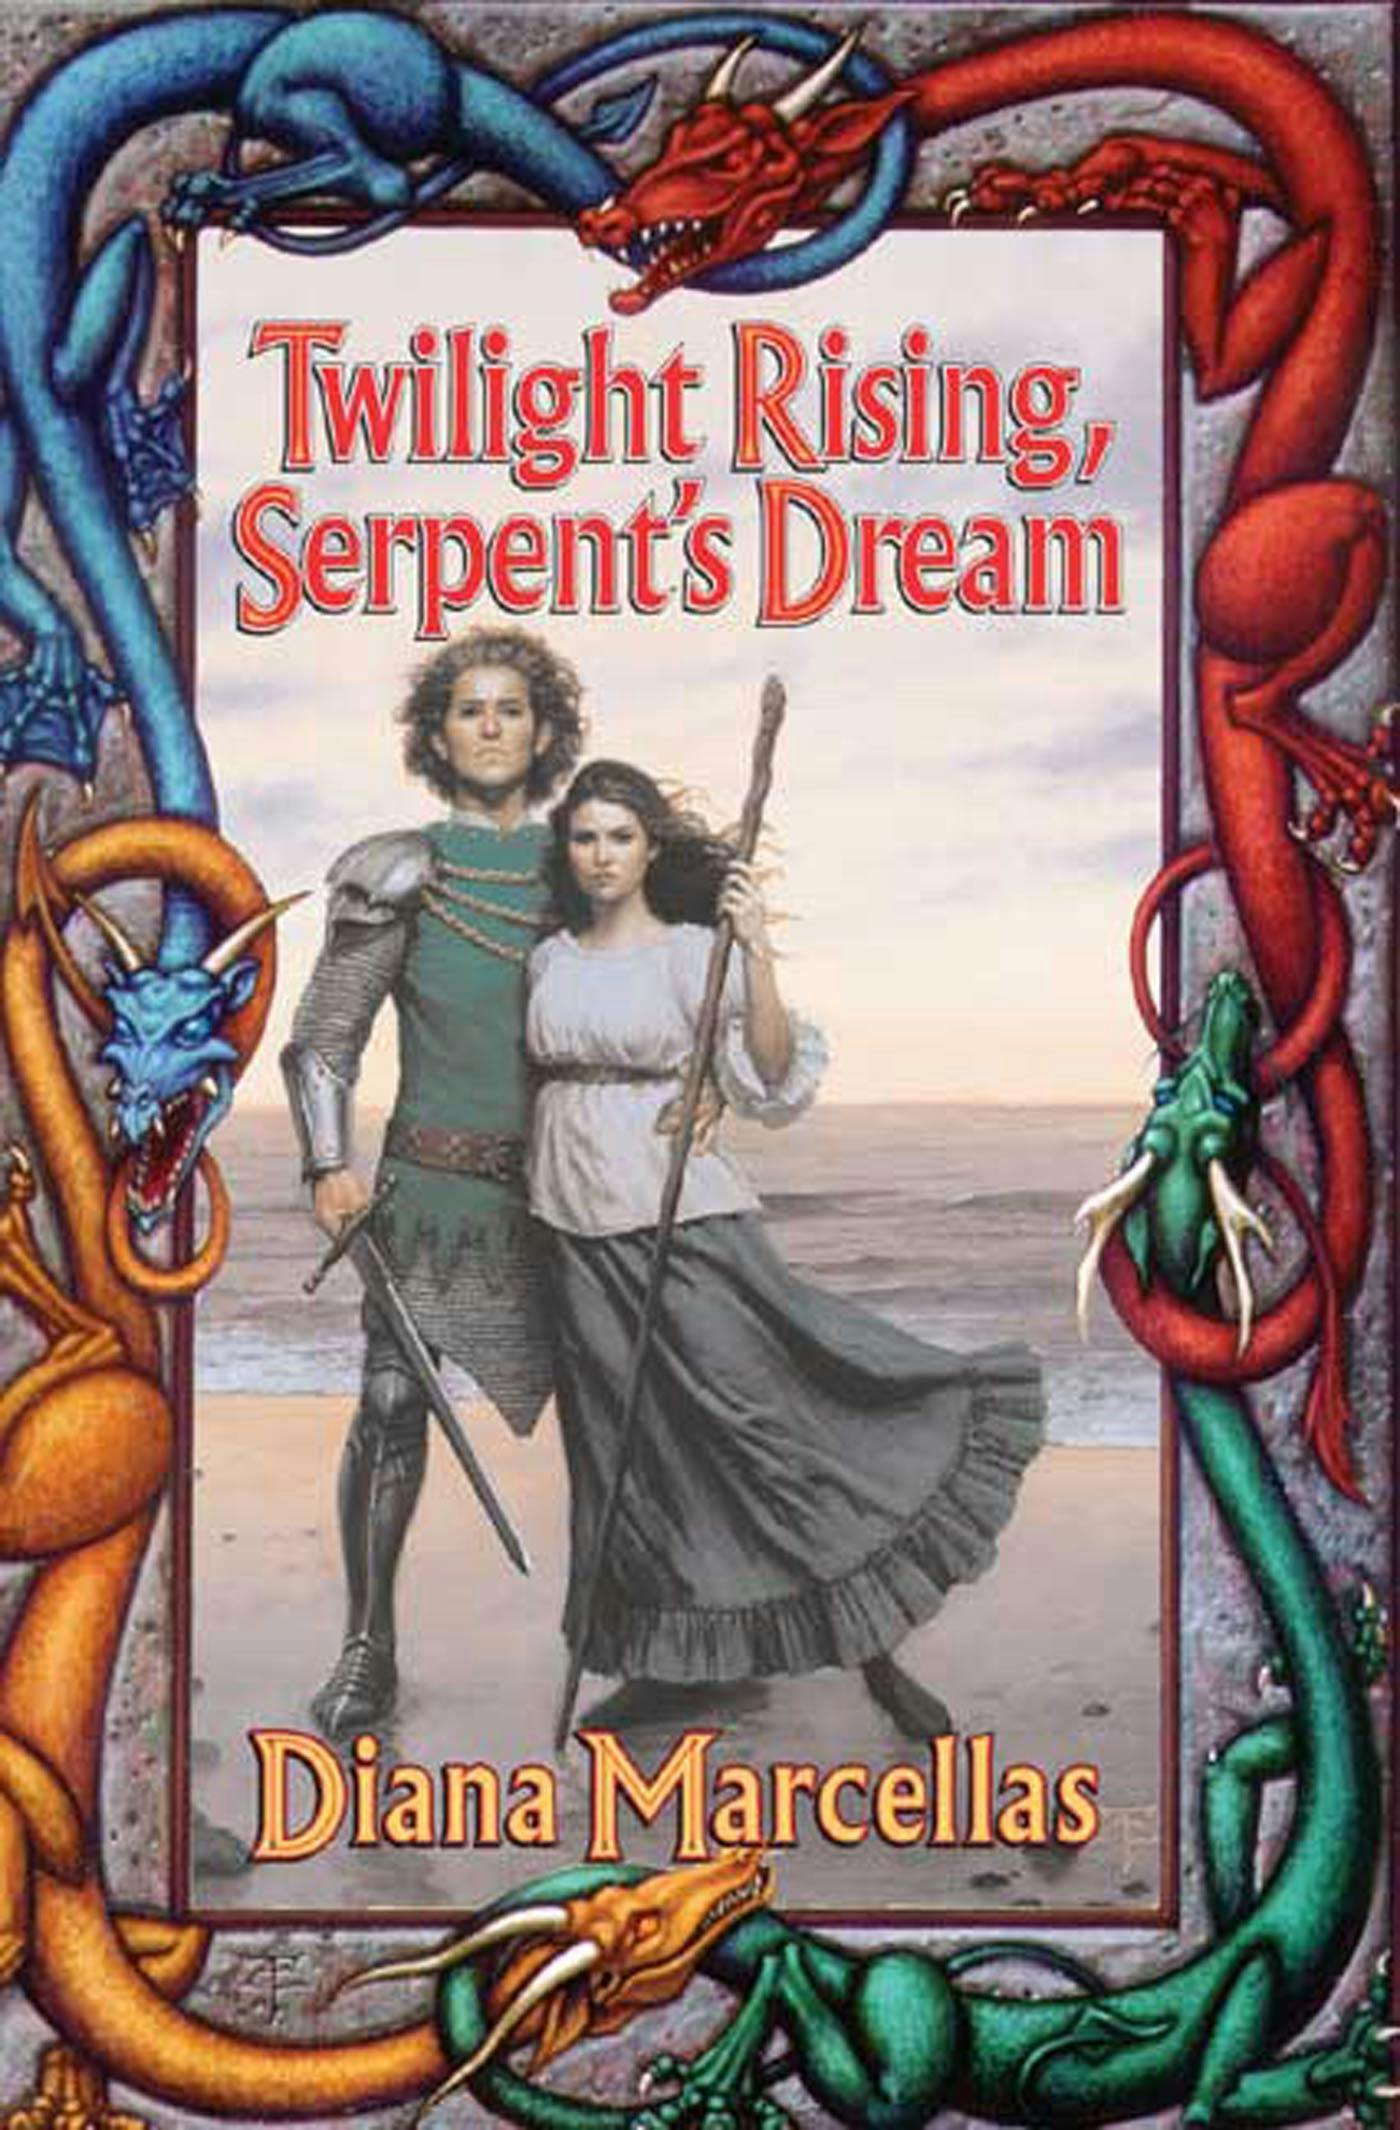 Cover for the book titled as: Twilight Rising, Serpent's Dream